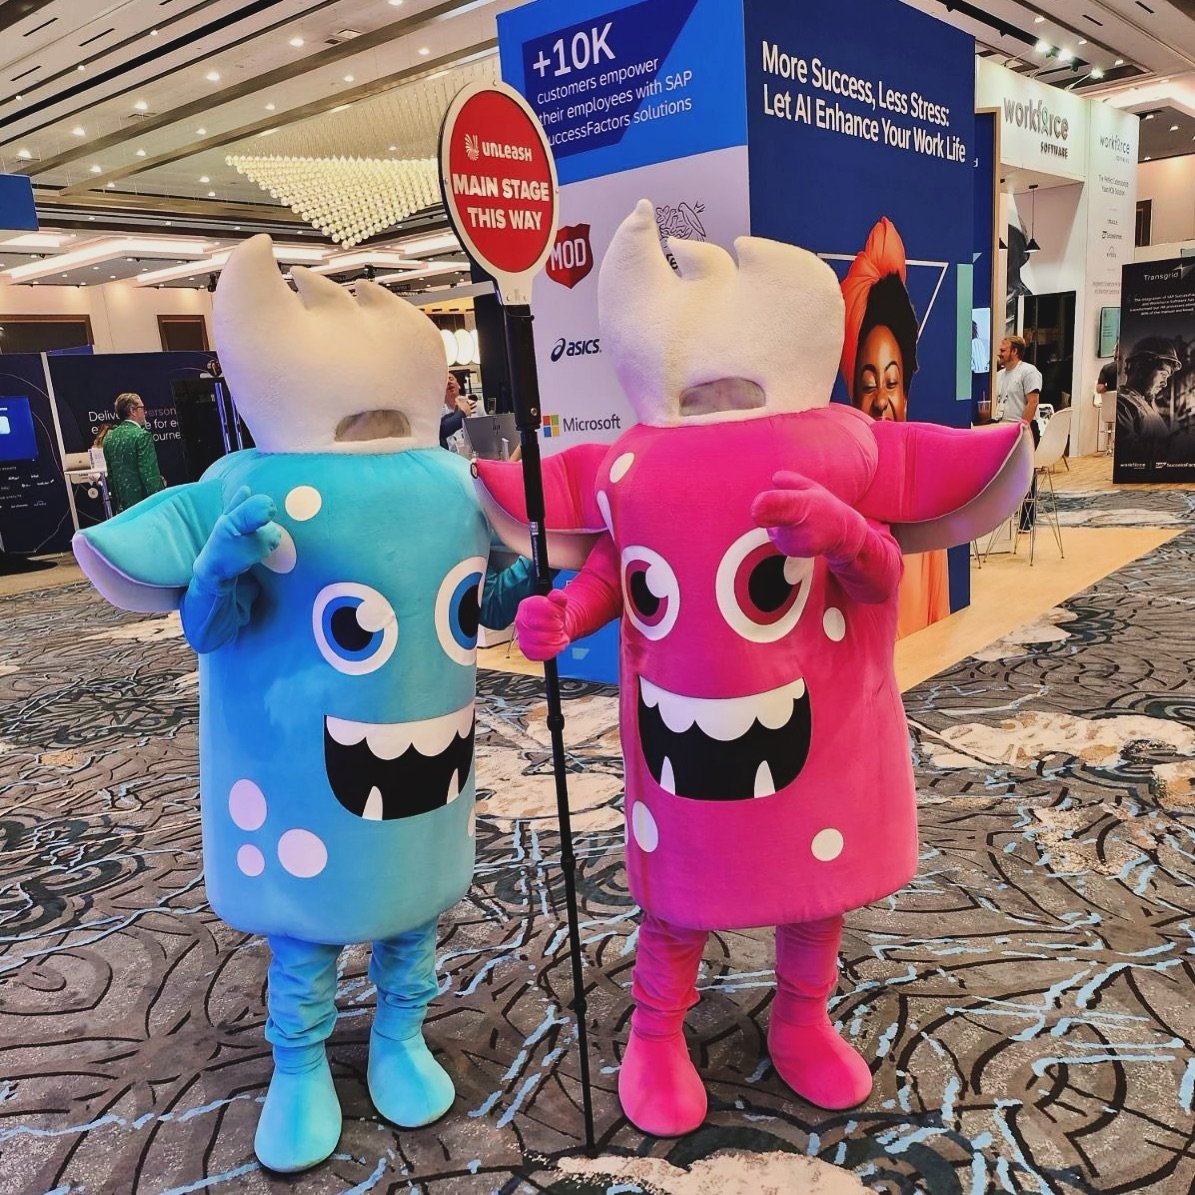 🎭Our costume characters bringing all the fun during #Unleash
📍Las Vegas 
.
.
#costumecharacters #unleash2024 #mascotlife #blossomtalent #brandambassador